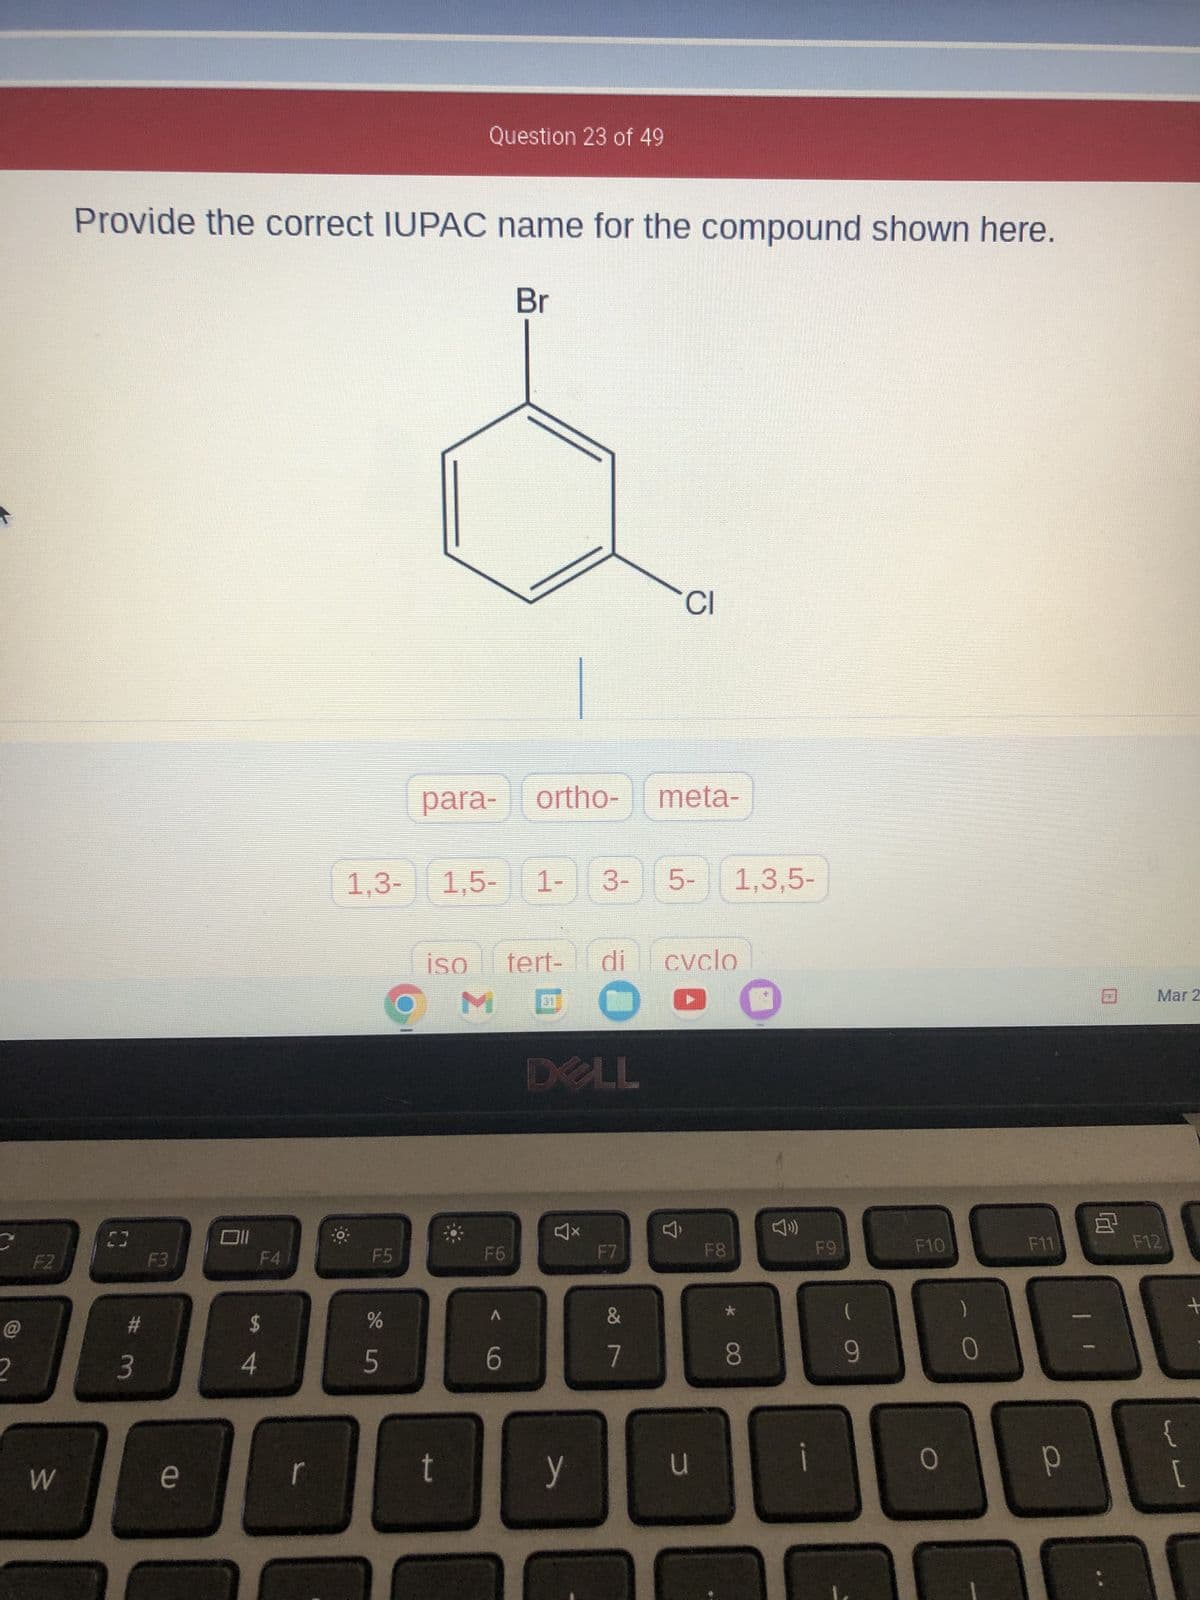 2
F2
W
Provide the correct IUPAC name for the compound shown here.
#
3
F3
e
Oll
F4
$
4
1,3-
·0.
F5
do in
Question 23 of 49
iso
t
para- ortho- meta-
1,5-1-3-
M
F6
Br
A
6
31
tert- di cvclo
C
DELL
y
CI
F7
&
7
5- 1,3,5-
3
F8
*
8
F9
9
D
F10
O
0
F11
Р
8
Mar 2
F12
+
{
[